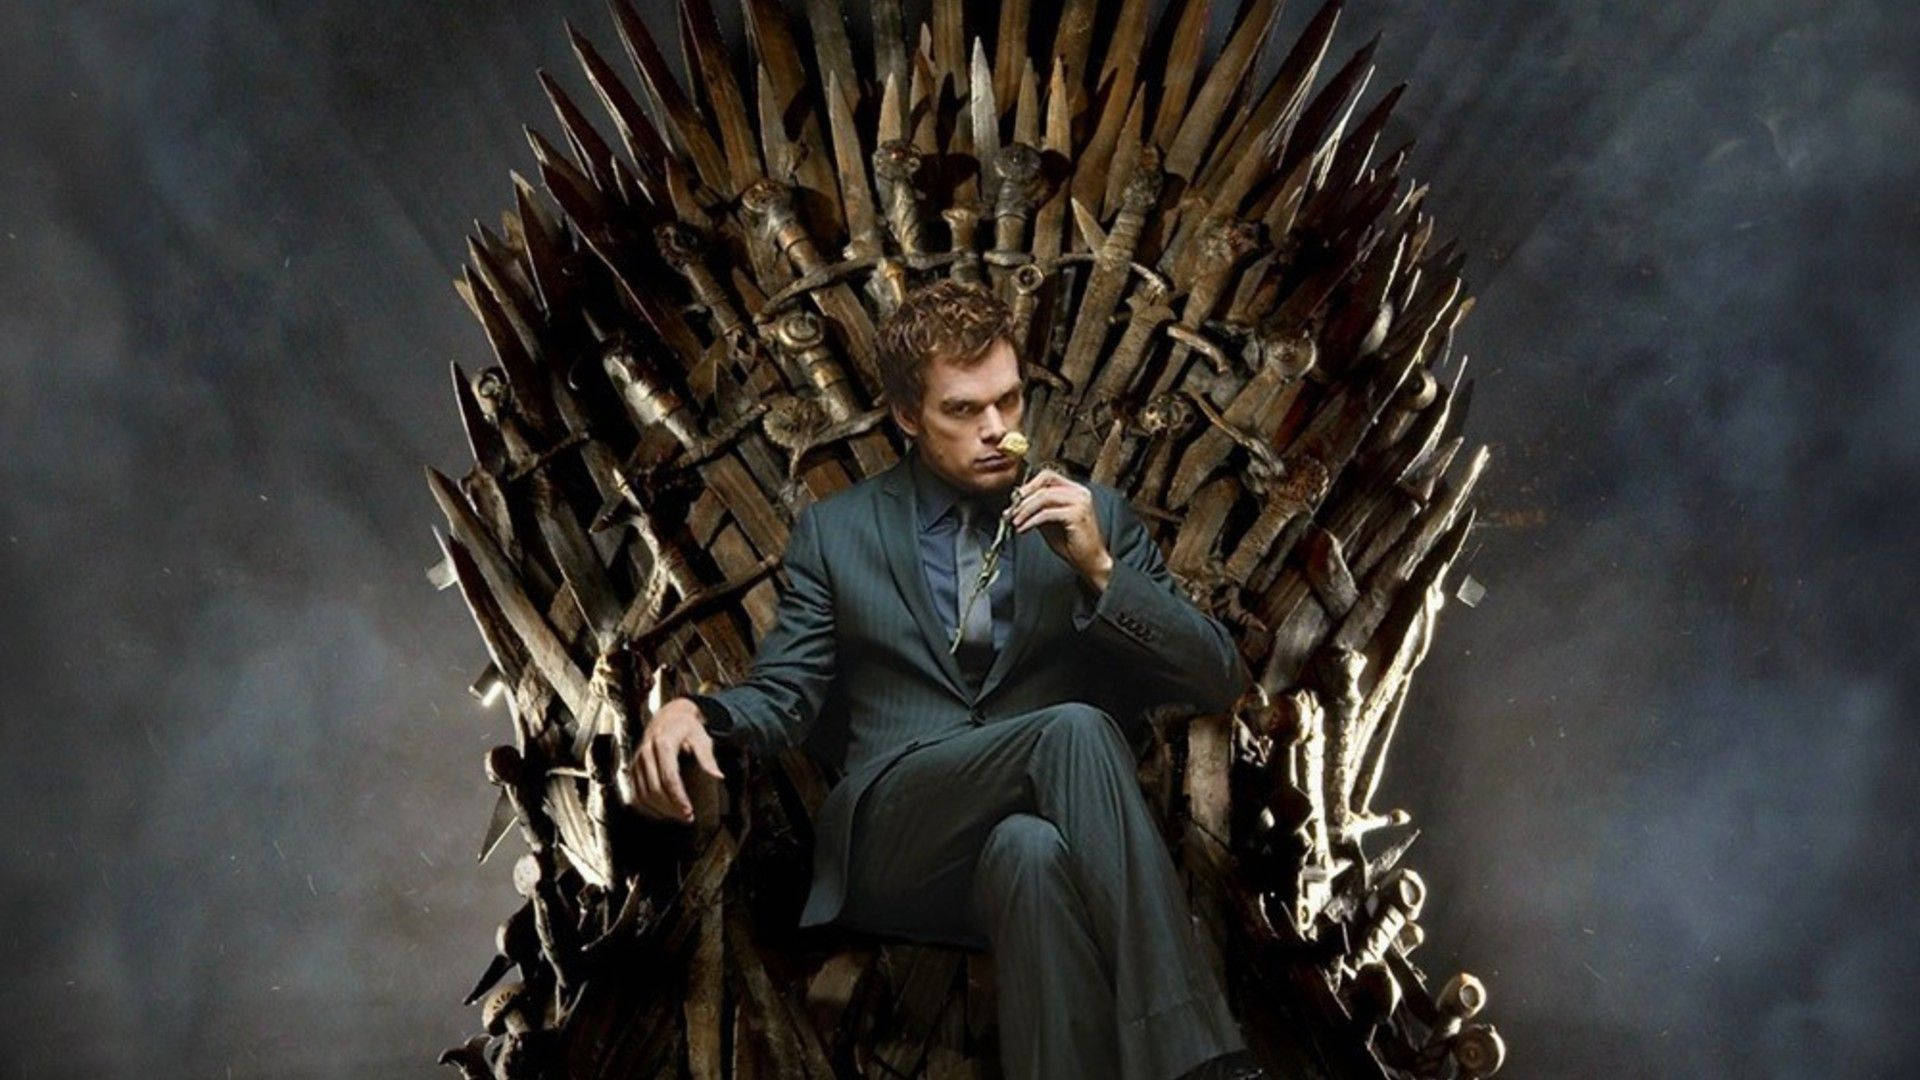 Dexter Famous American Actor Iron Throne Background